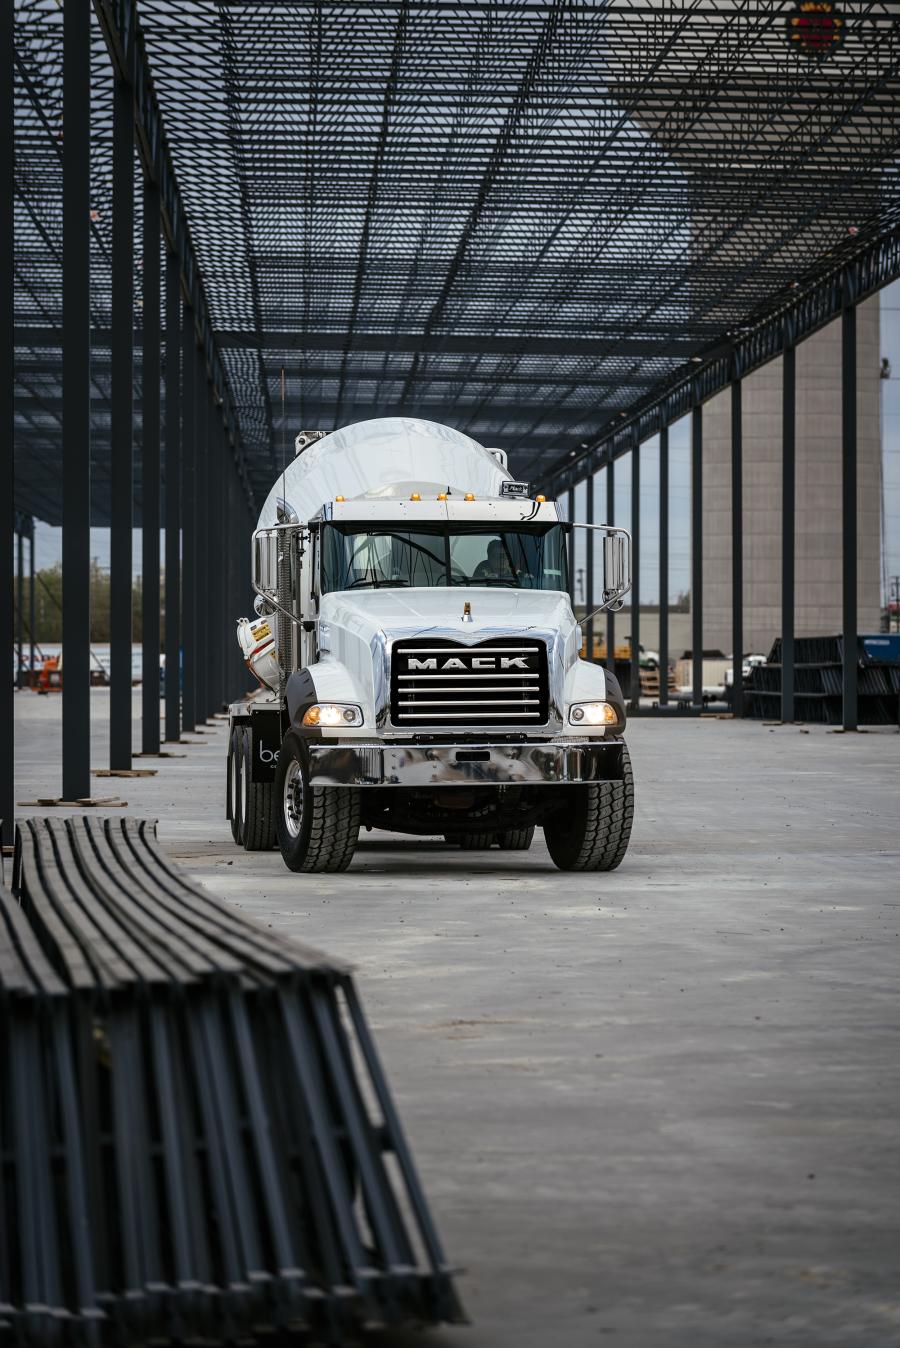 As the construction industry finishes a strong 2017 and economists expect continued growth in 2018, Mack Trucks announced a new loyalty reward card for Mack Granite customers and National Ready Mixed Concrete Association (NRMCA) members. Mack made the announcement during World of Concrete 2018, Jan. 23-25 at the Las Vegas Convention Center.